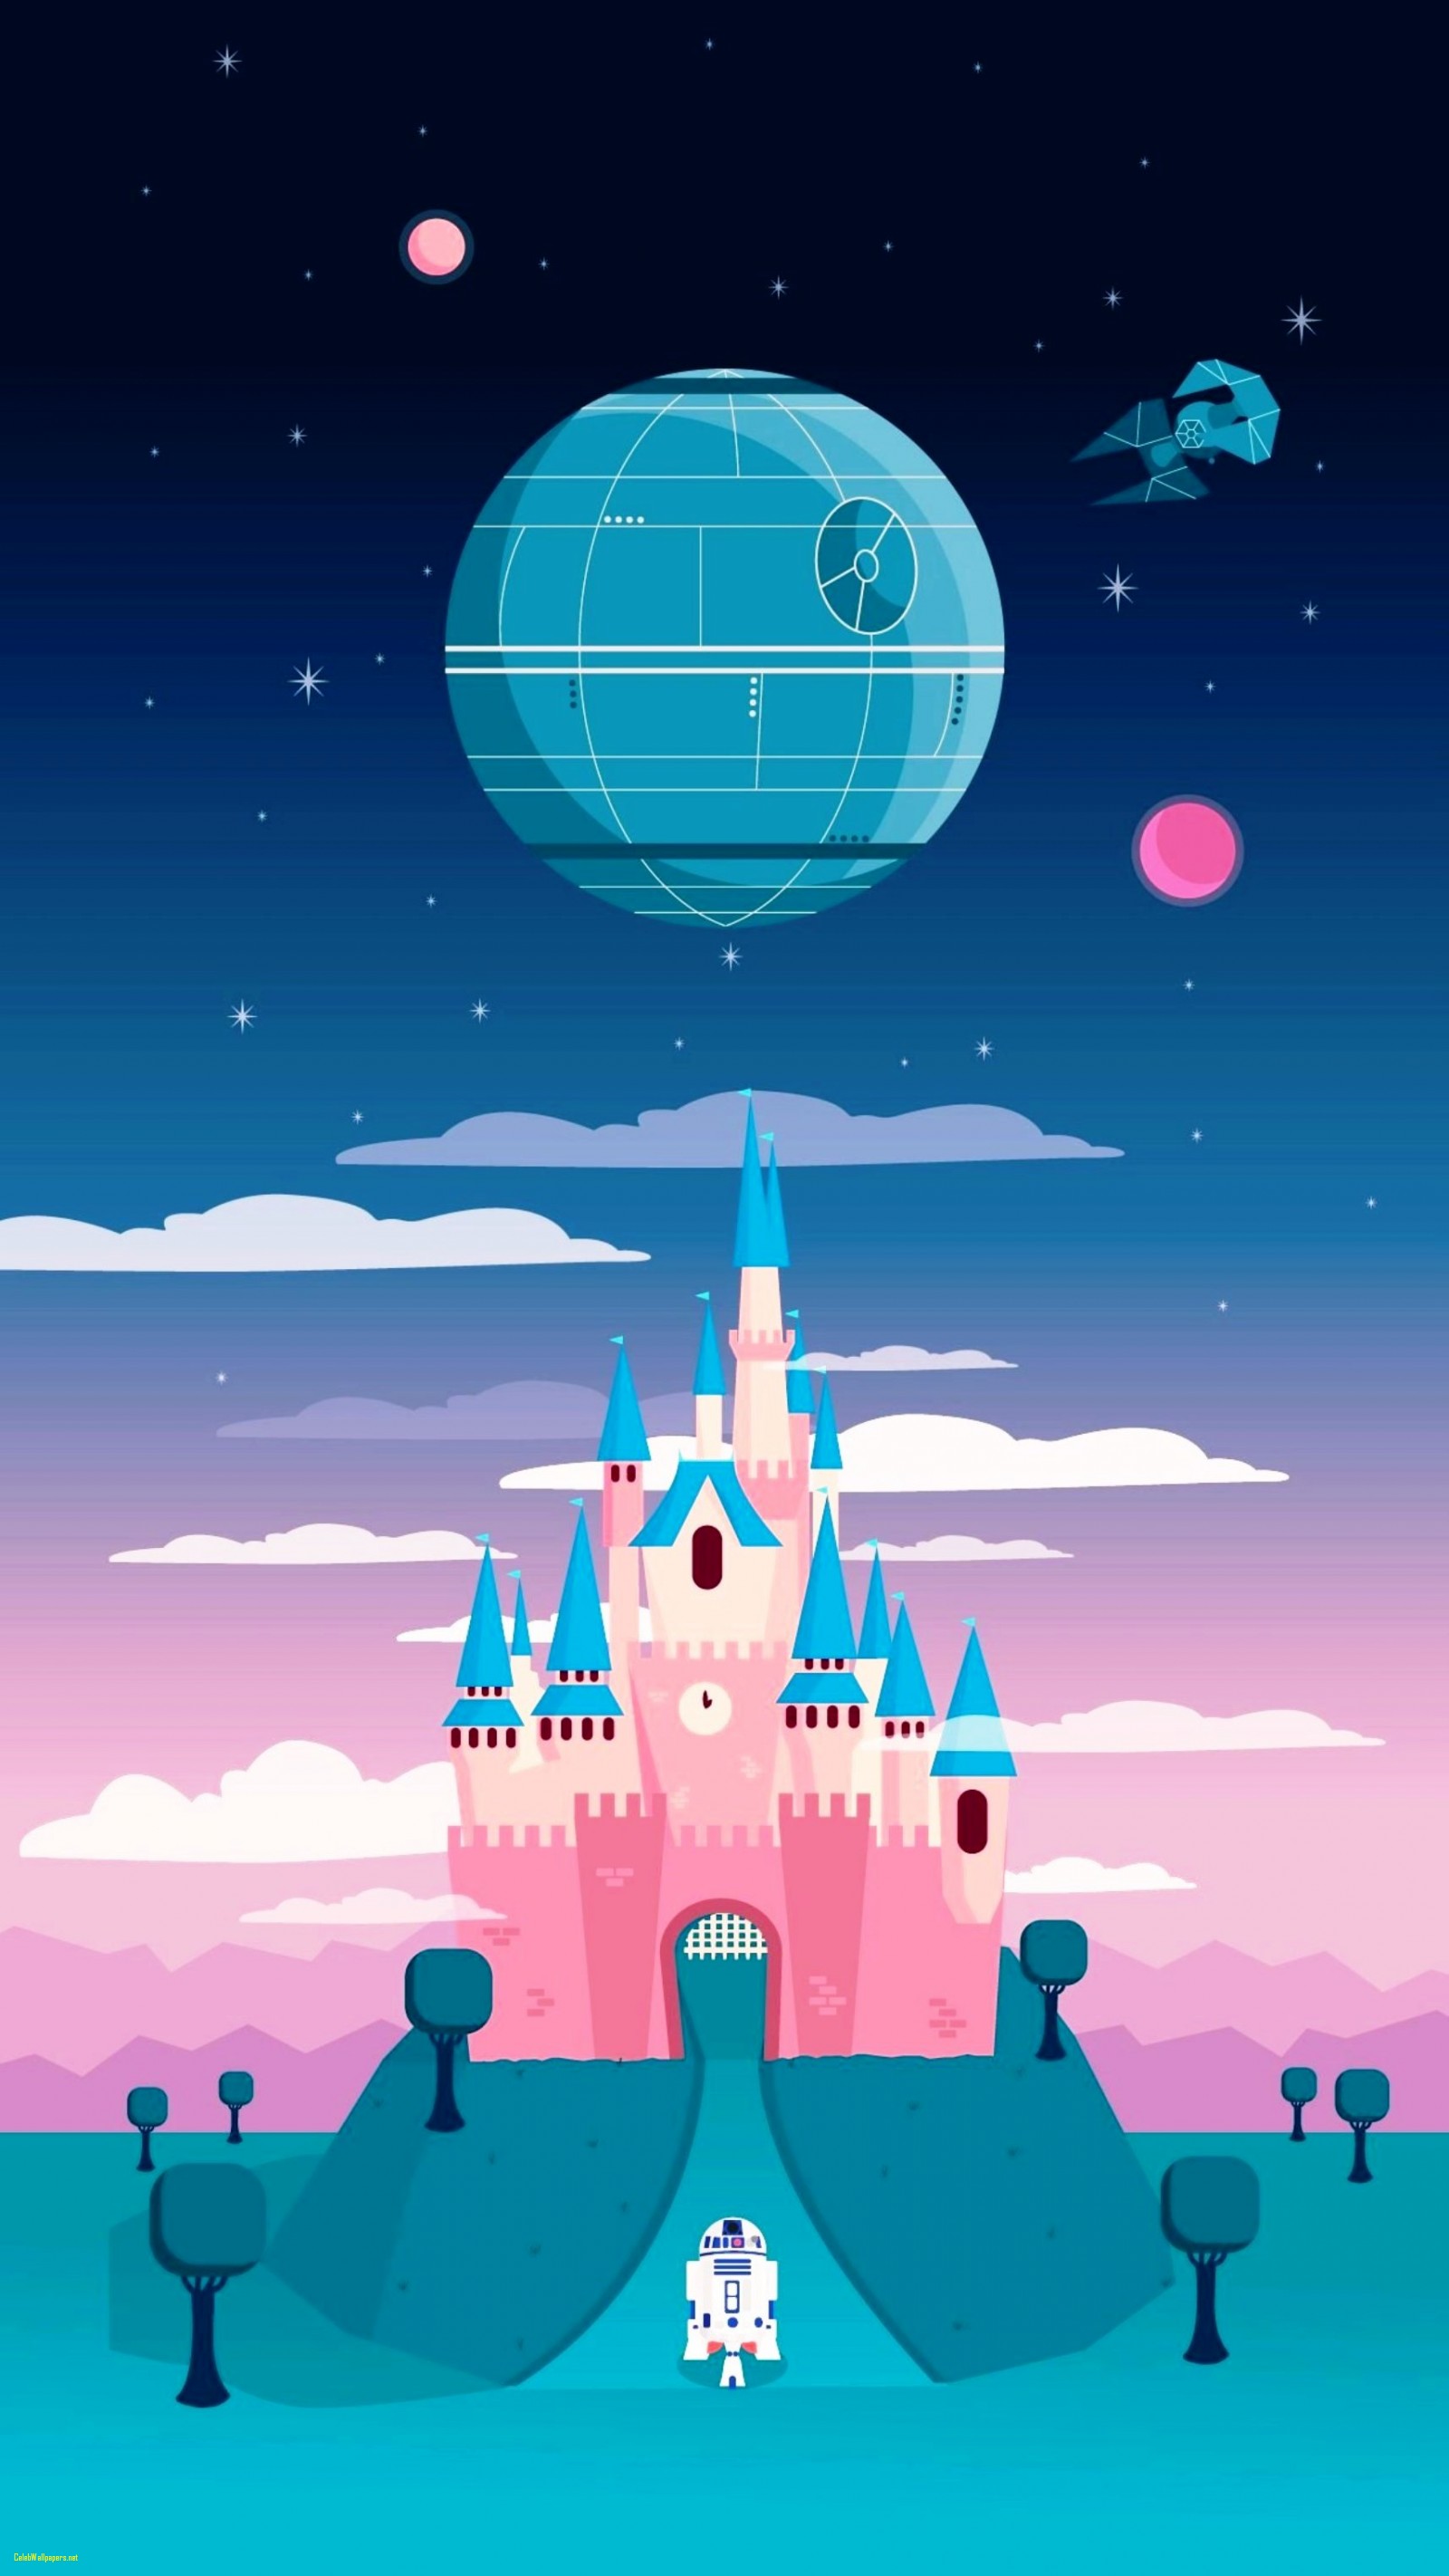 Cute Wallpapers For Iphone Awesome Cute Iphone Wallpapers - Disney Wallpaper Iphone - HD Wallpaper 